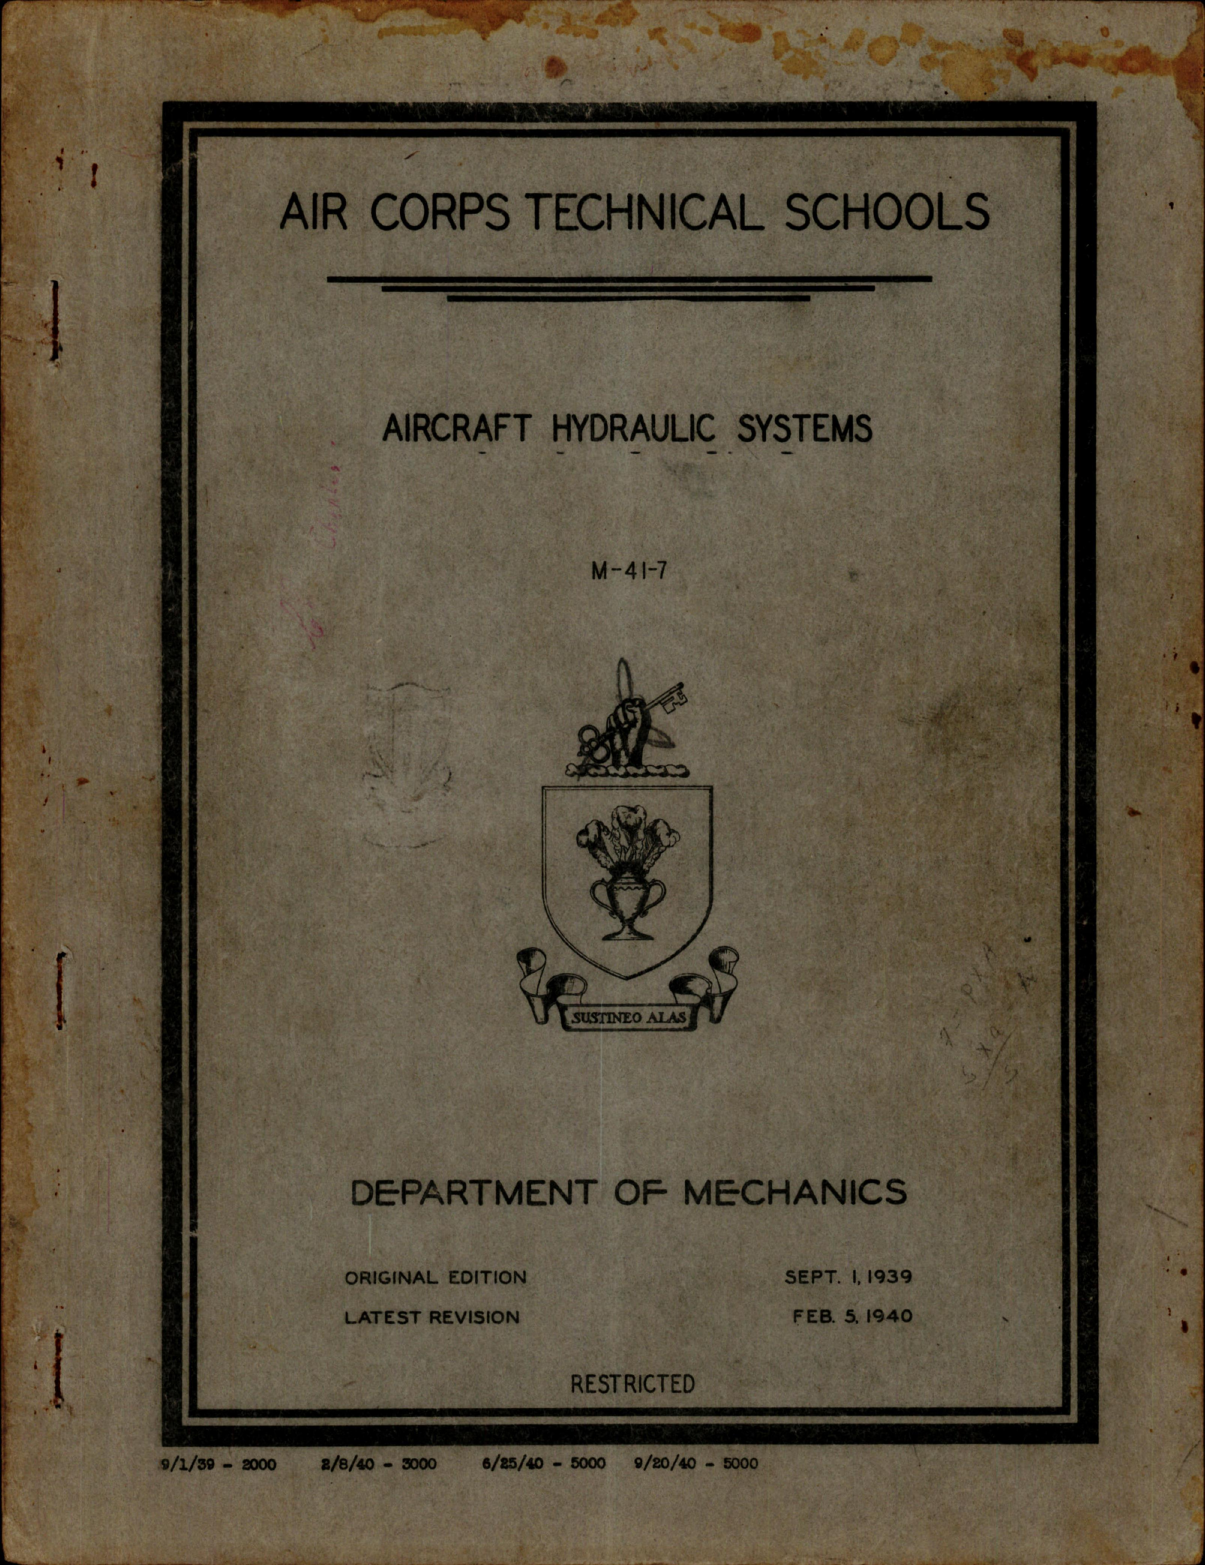 Sample page 1 from AirCorps Library document: Air Corps Technical Schools - Aircraft Hydraulic Systems